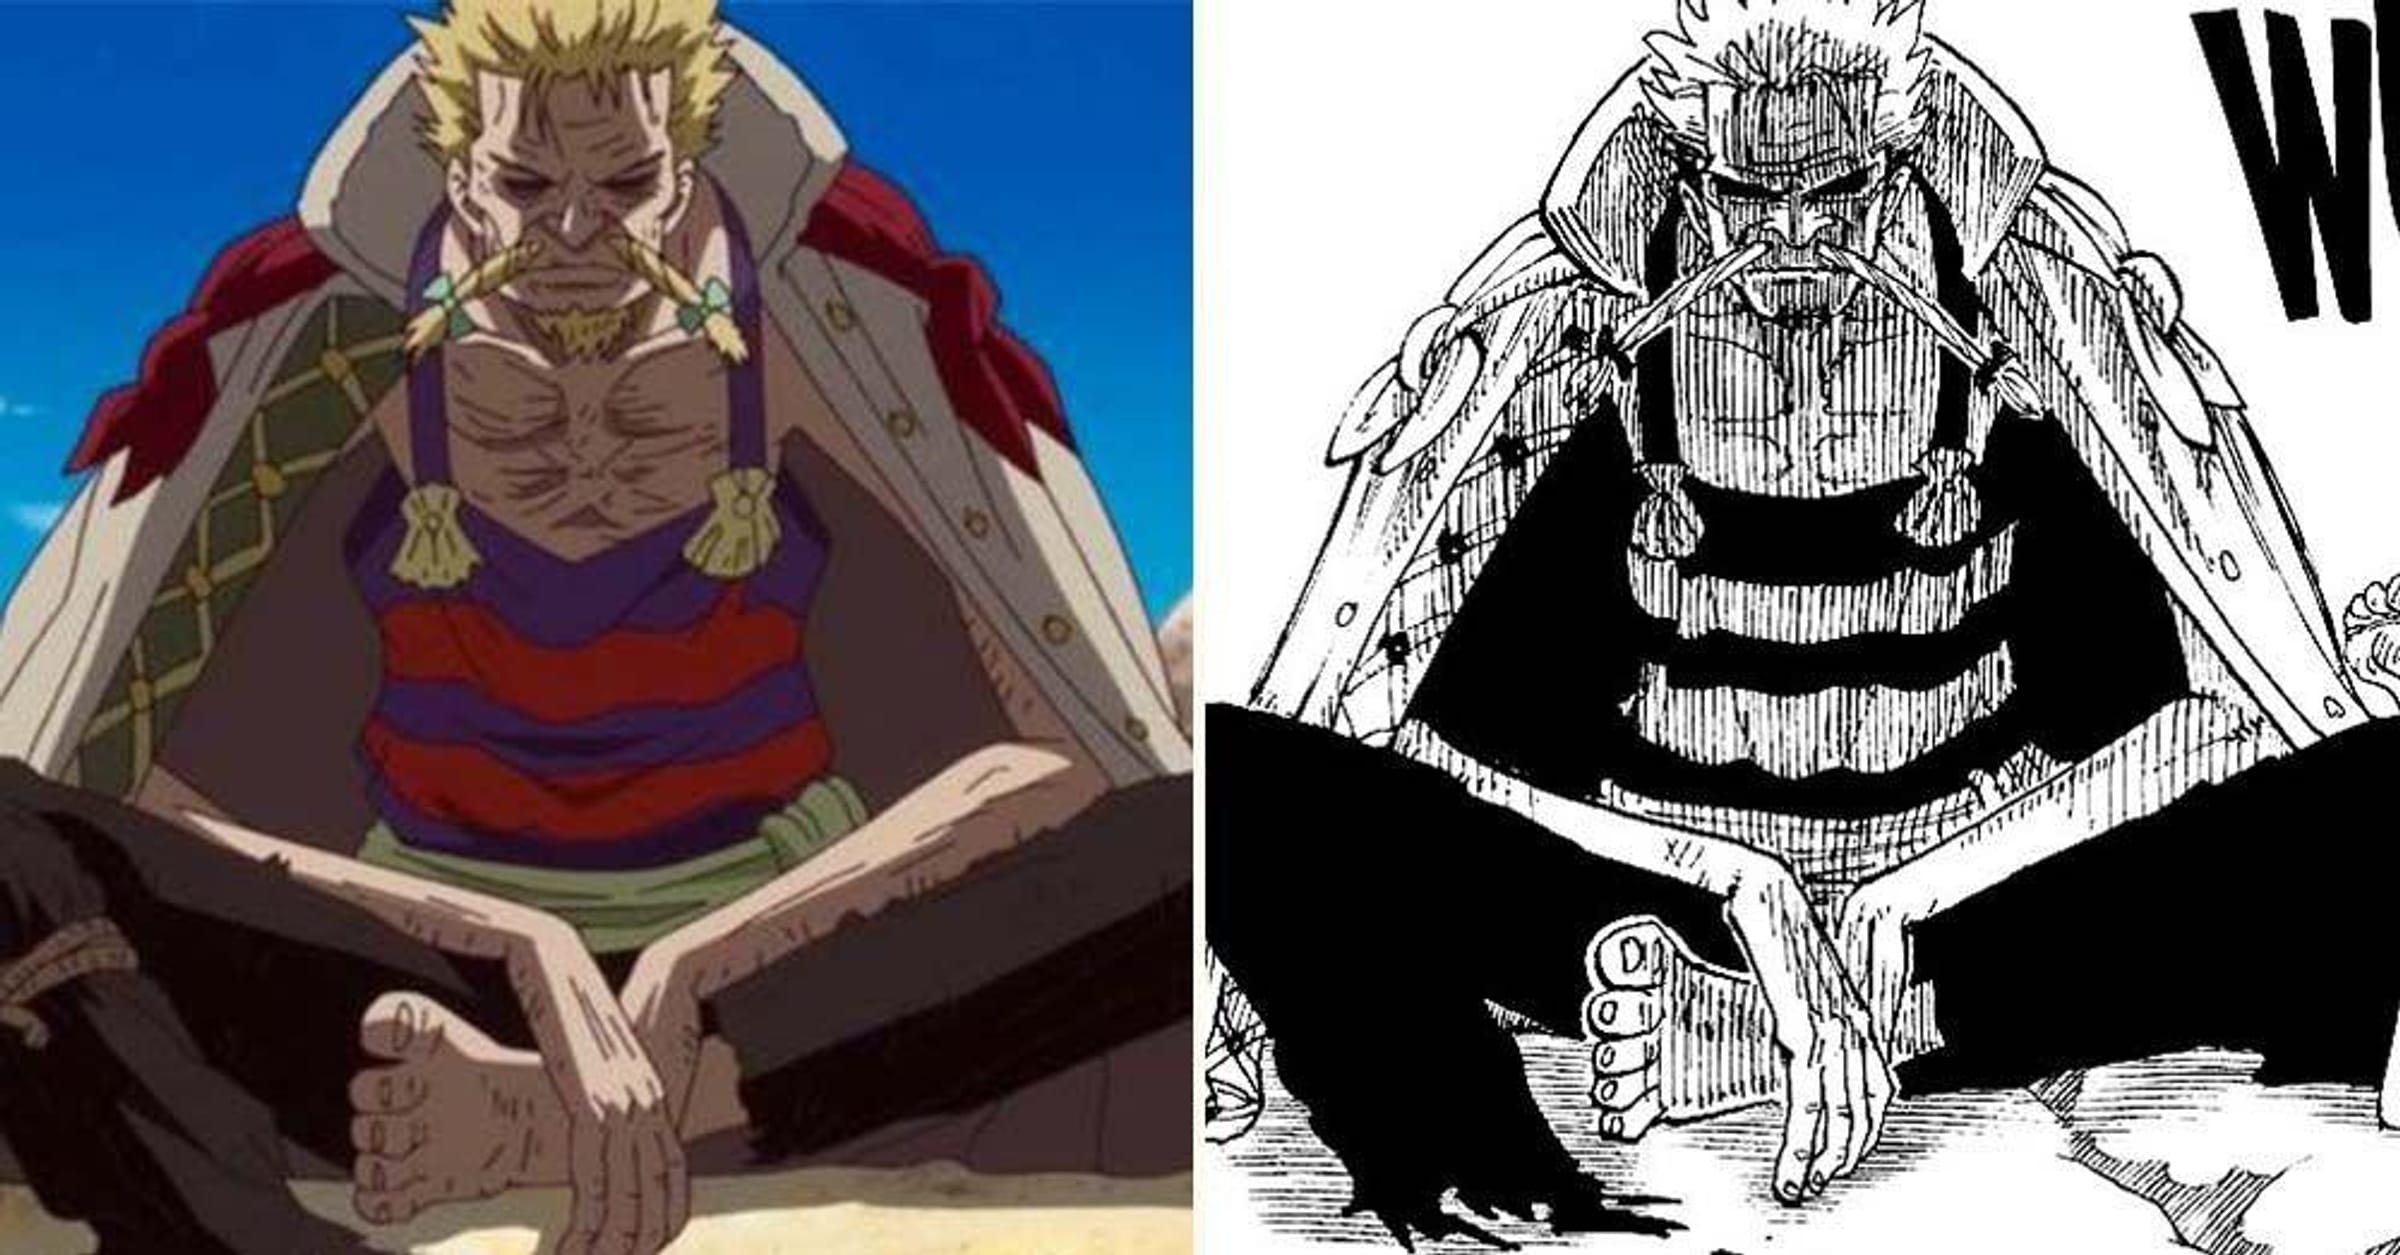 One Piece live action versus anime ending: 3 key differences